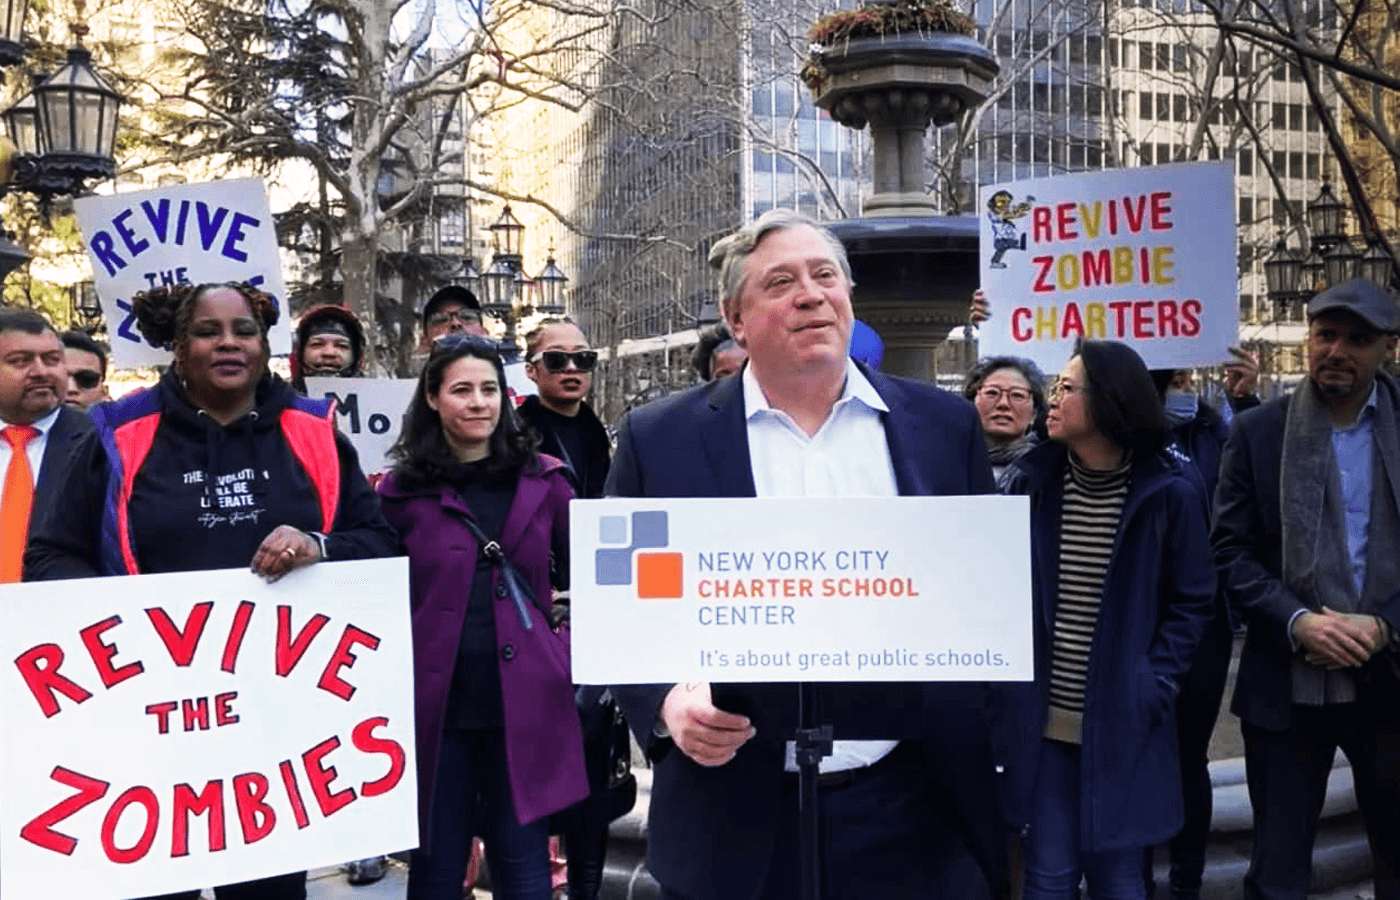 James Merriman, head of the New York Charter Center, an advocacy group, says charter schools fought to get a foothold in New York City and benefited from Mayor Bloomberg’s offer of space.